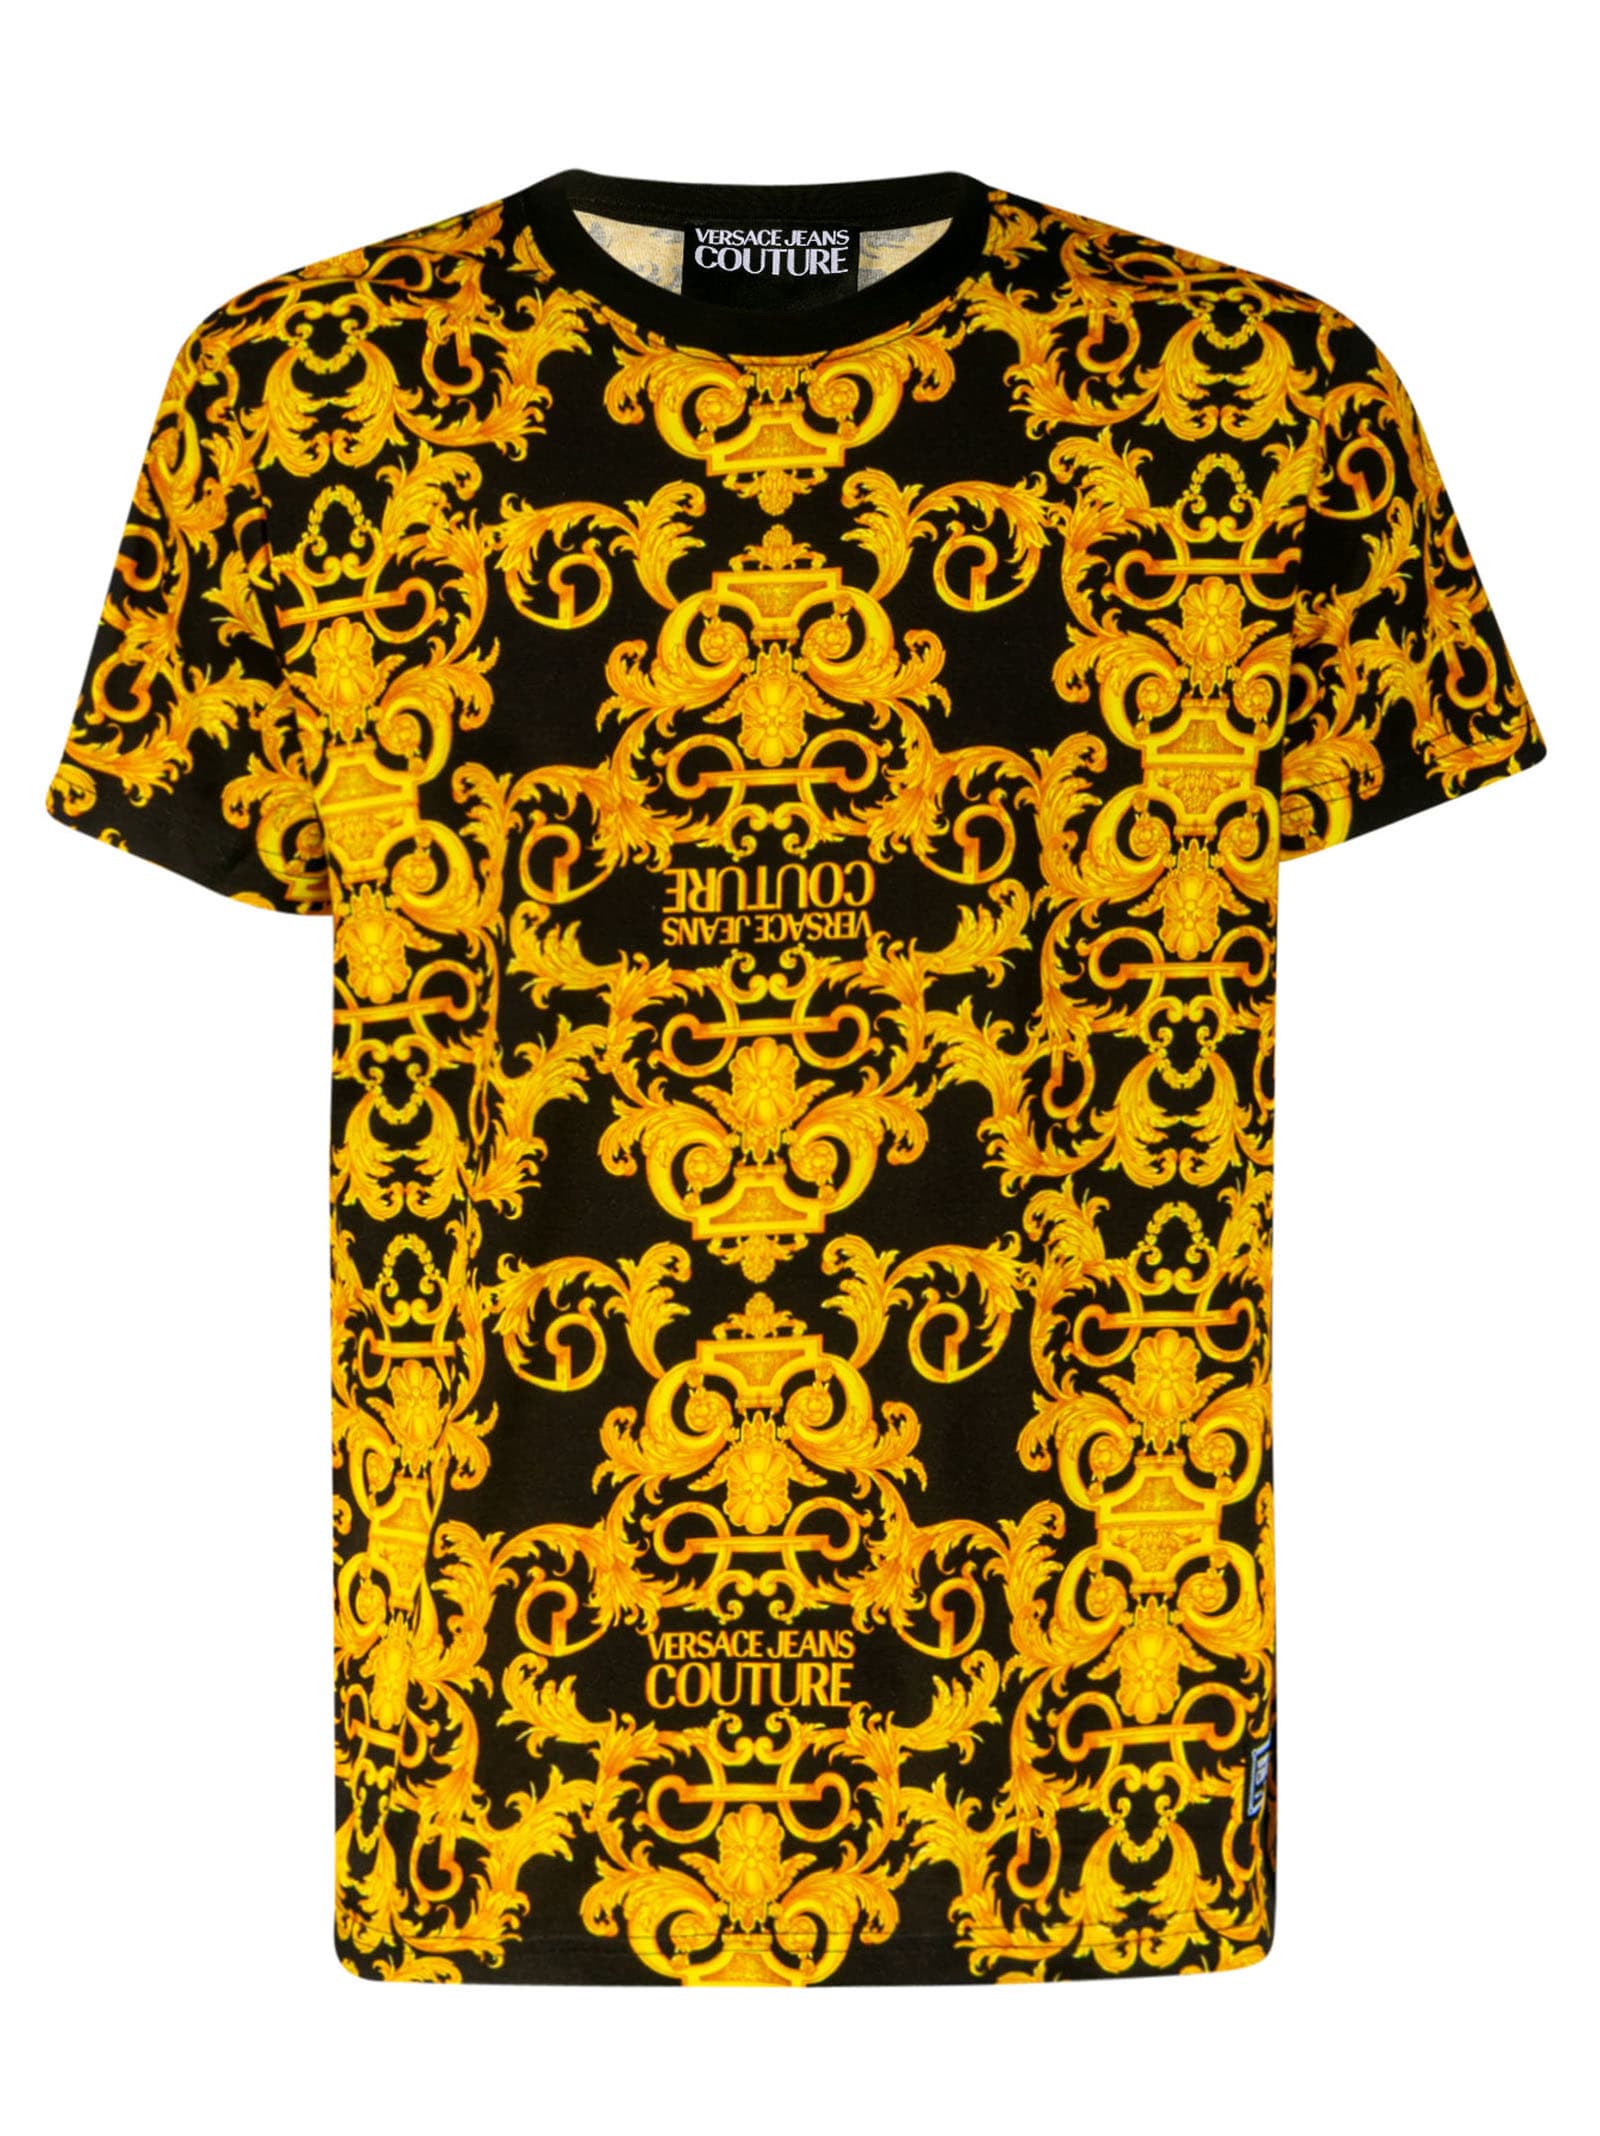 VERSACE JEANS COUTURE COUTURE PRINTED ALL-OVER T-SHIRT,B3.GWA7S0.S0155-899